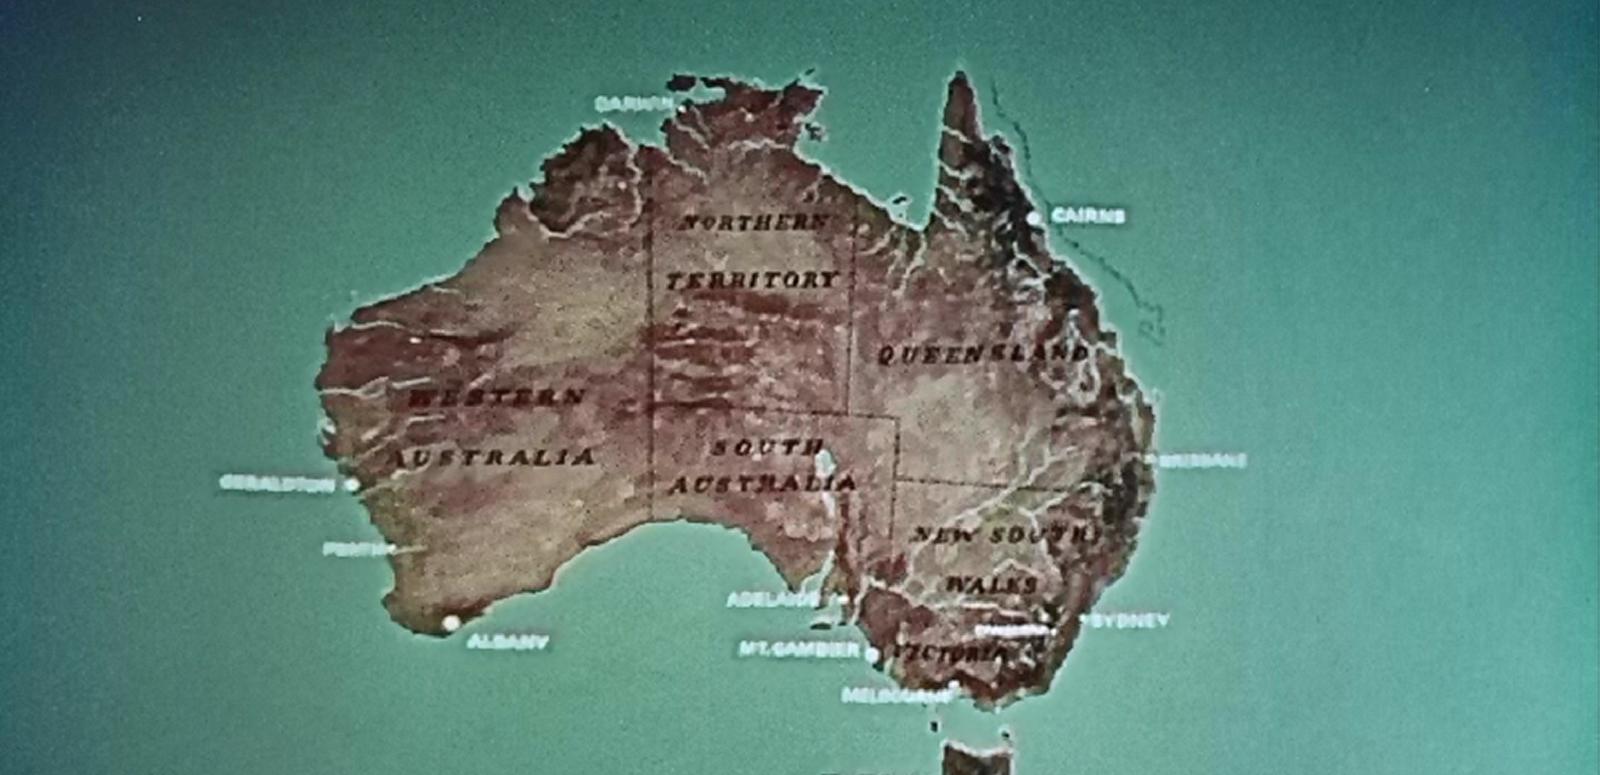 Map of Australia, showing names of its capital cities, regional centres, states and territories